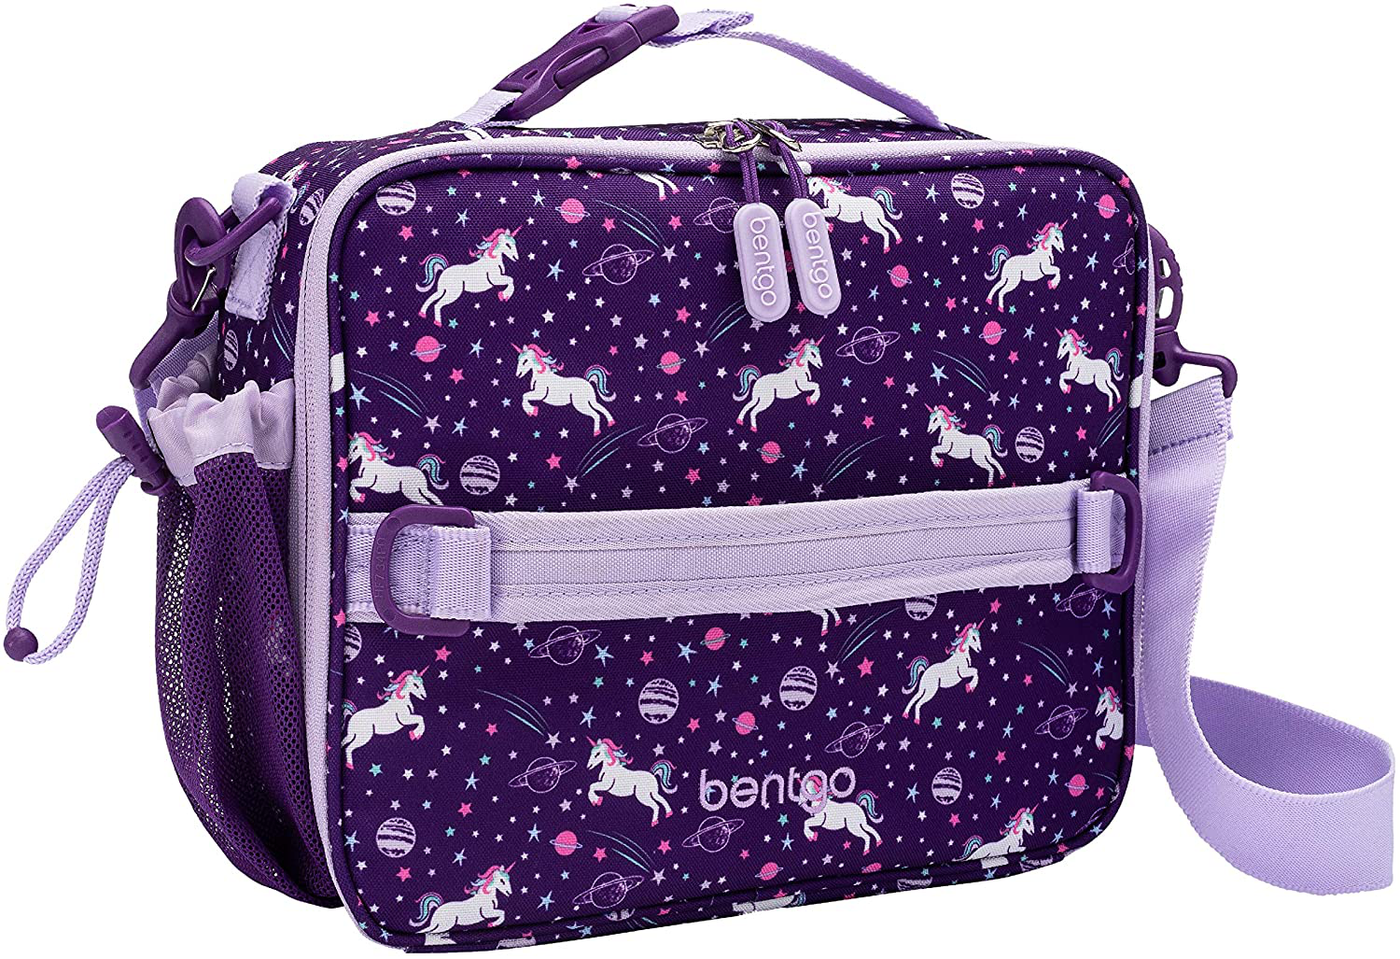 Bentgo Kids Prints Lunch Bag - Double Insulated, Durable, Water-Resistant Fabric with Interior and Exterior Zippered Pockets and External Bottle Holder- Ideal for Children of All Ages (Unicorn)